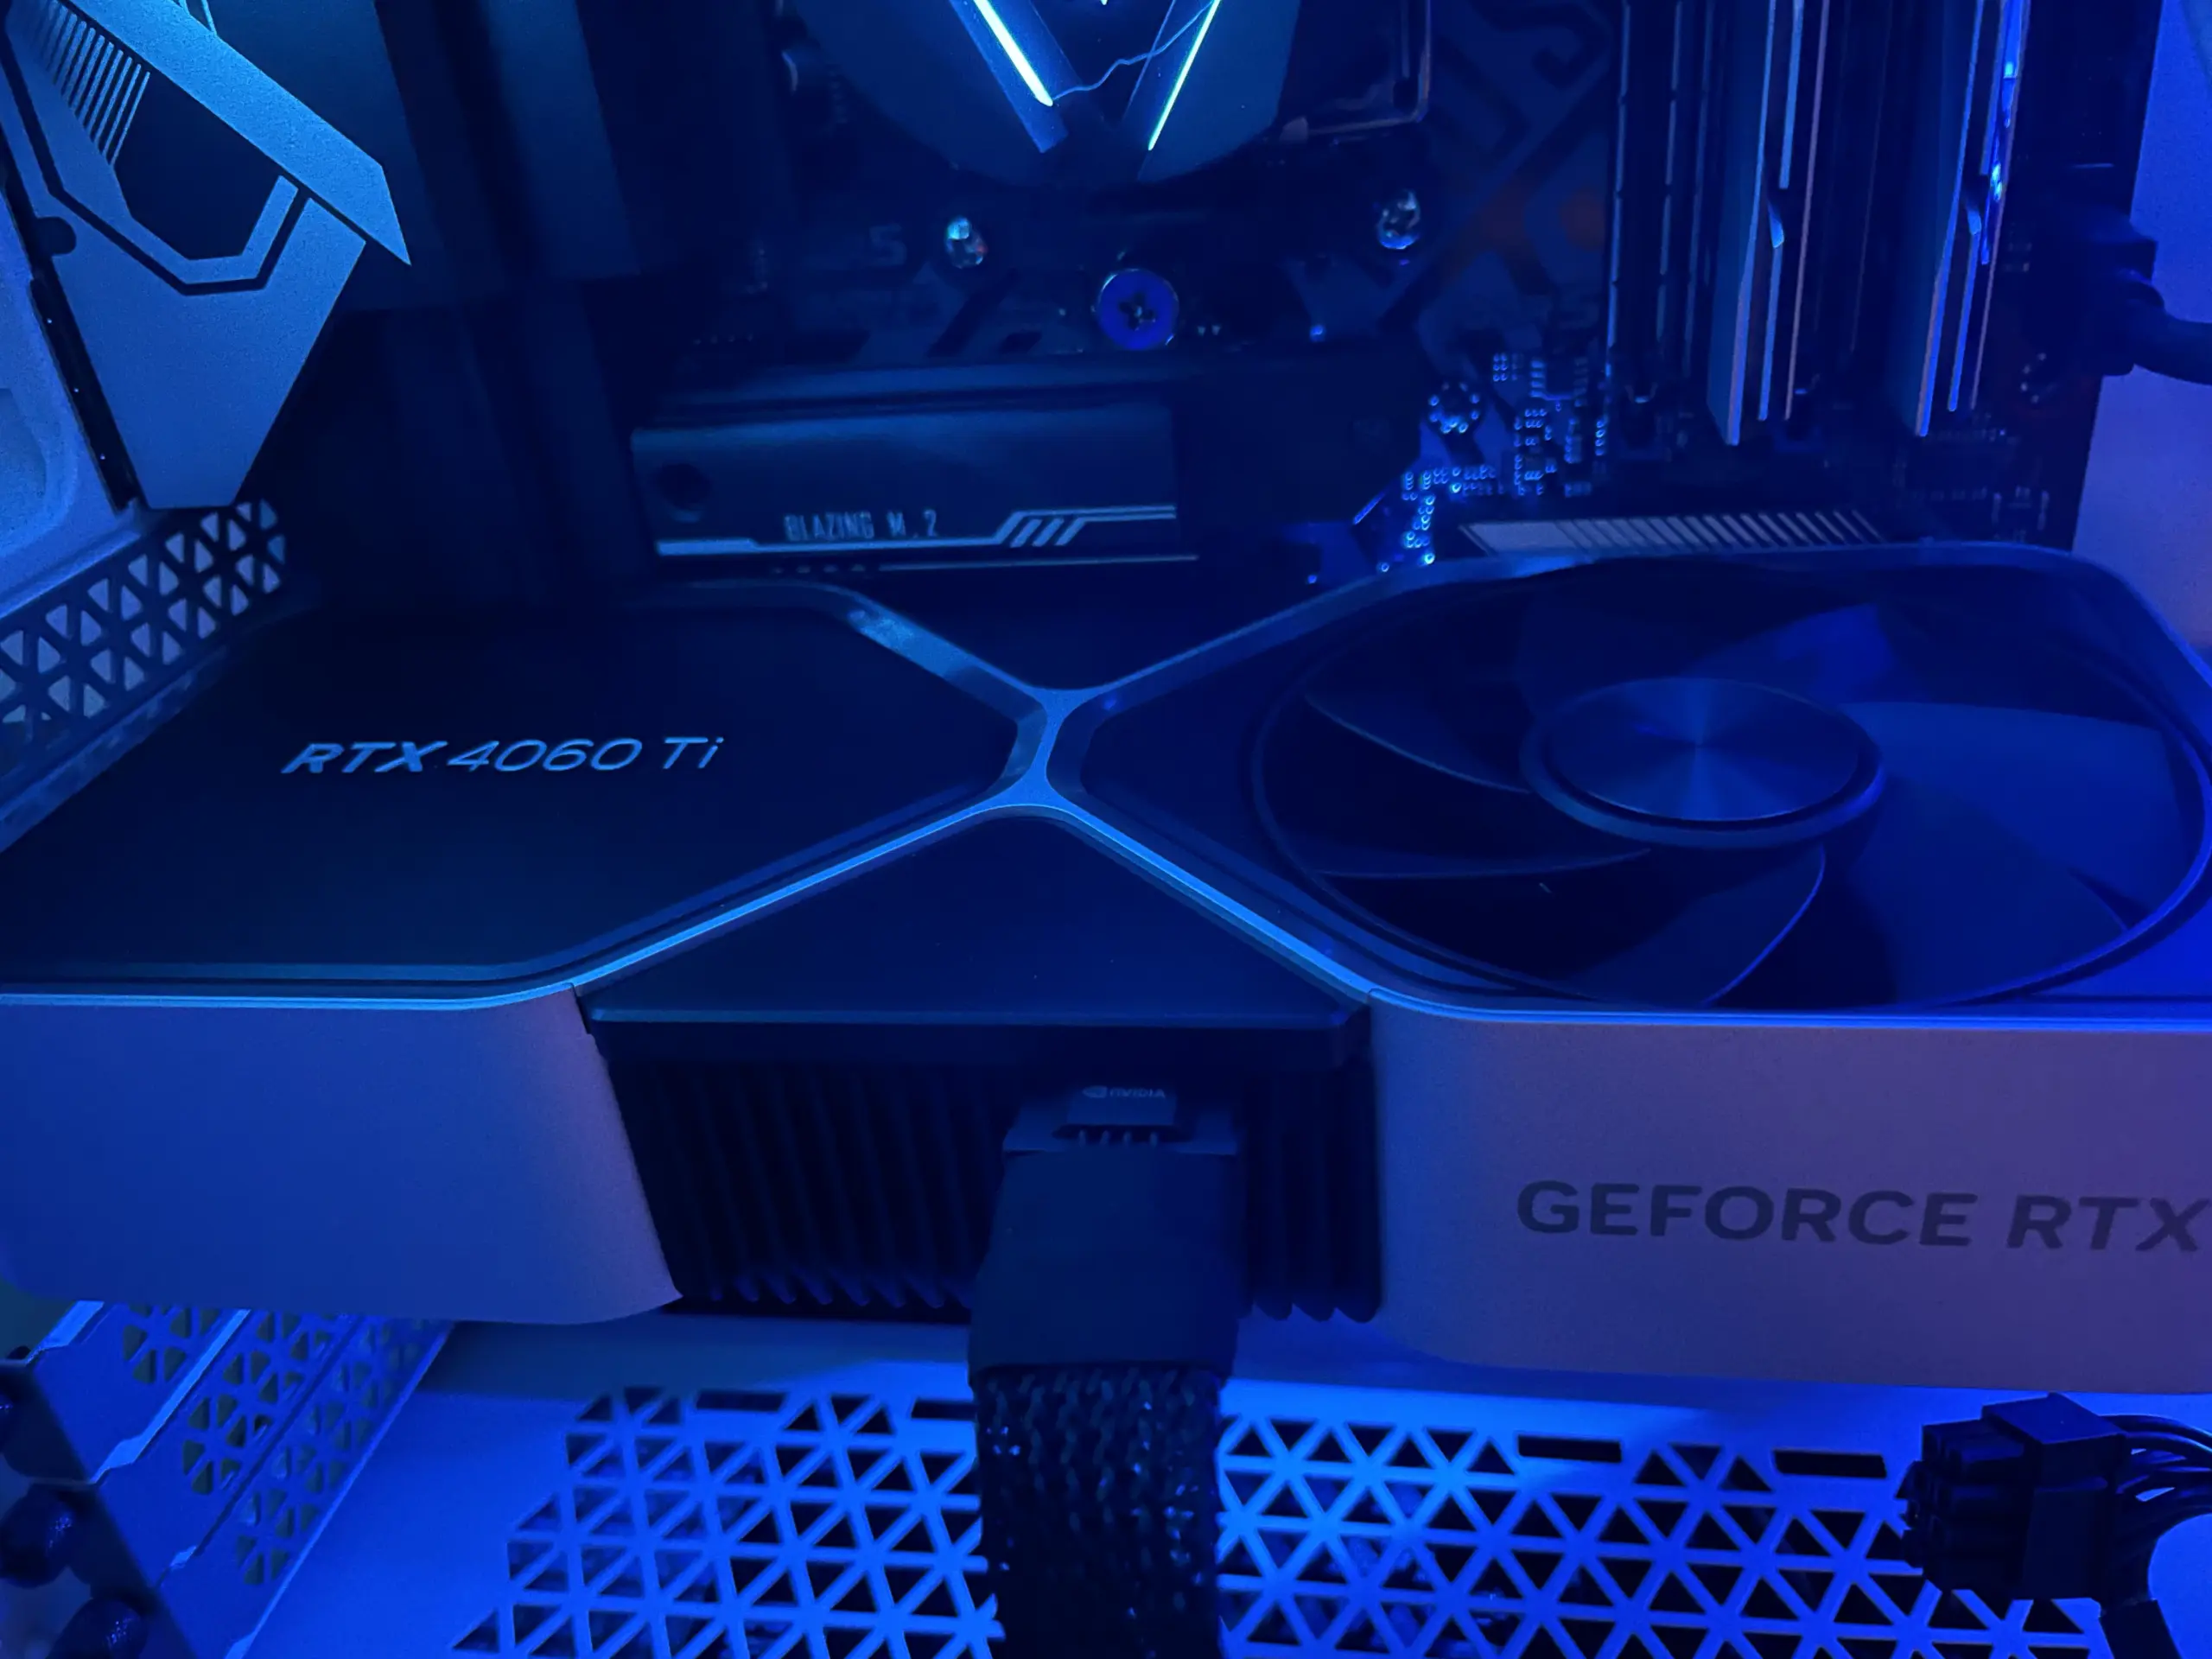 GeForce RTX 4060 Ti Vs 4070 - Which is the true value for money